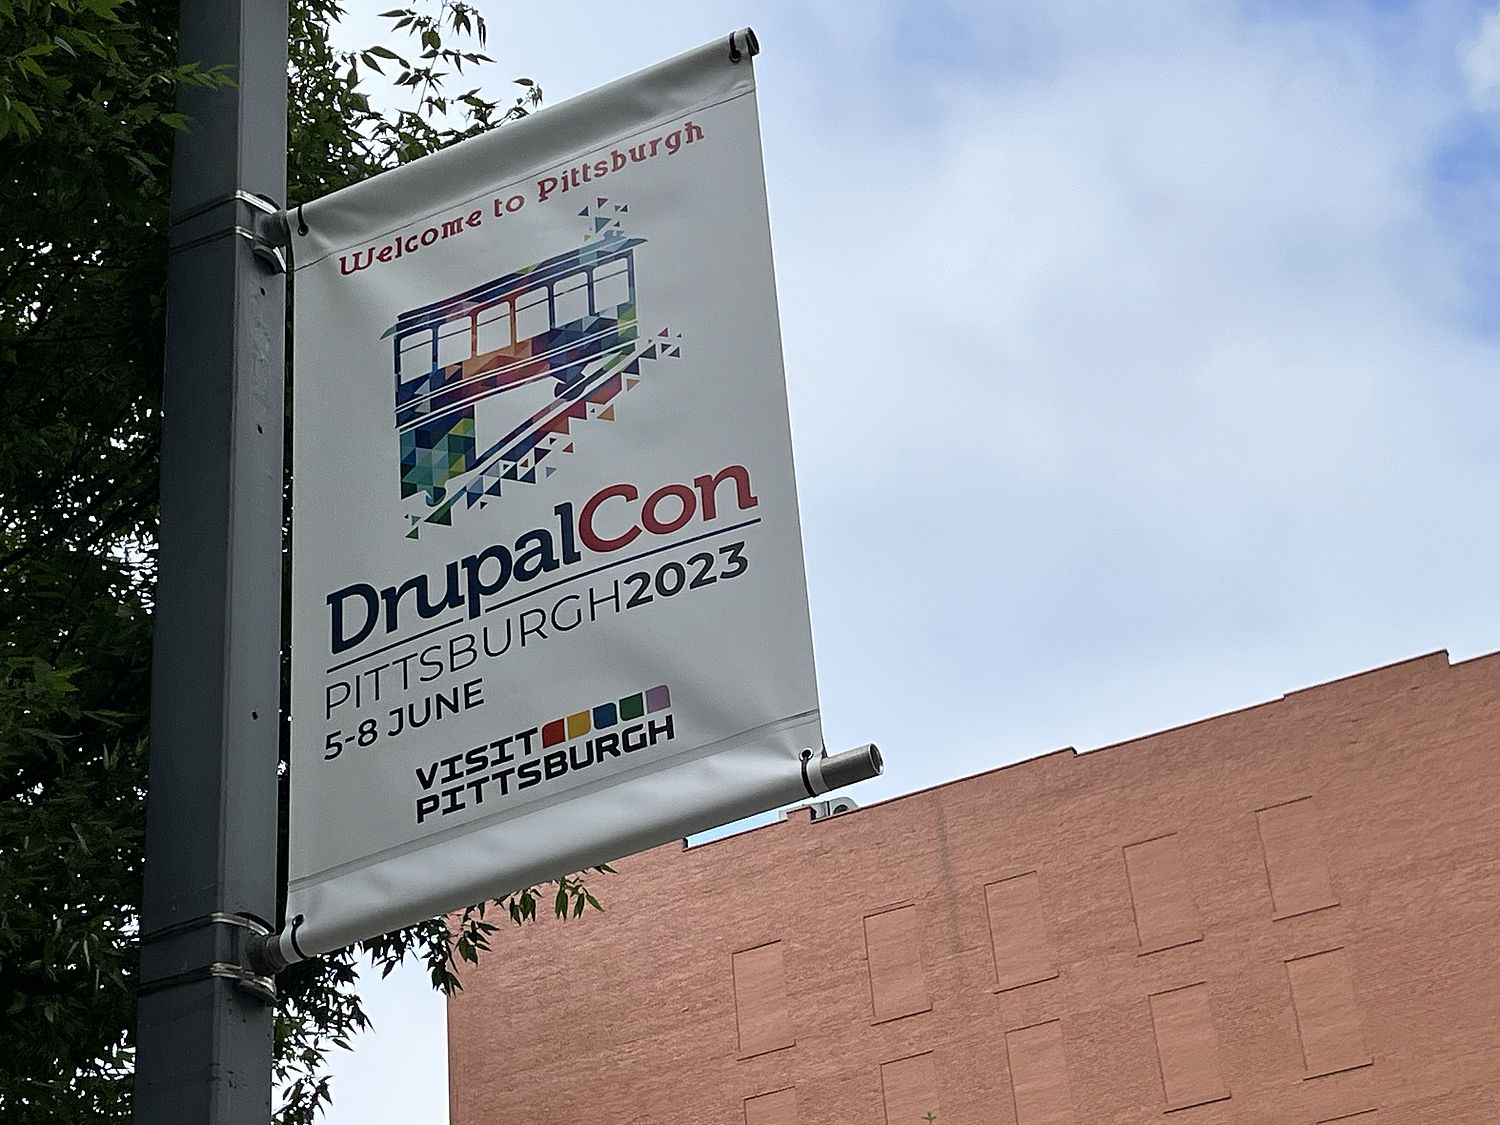 Lamp post banner featuring DrupalCon logo and info.